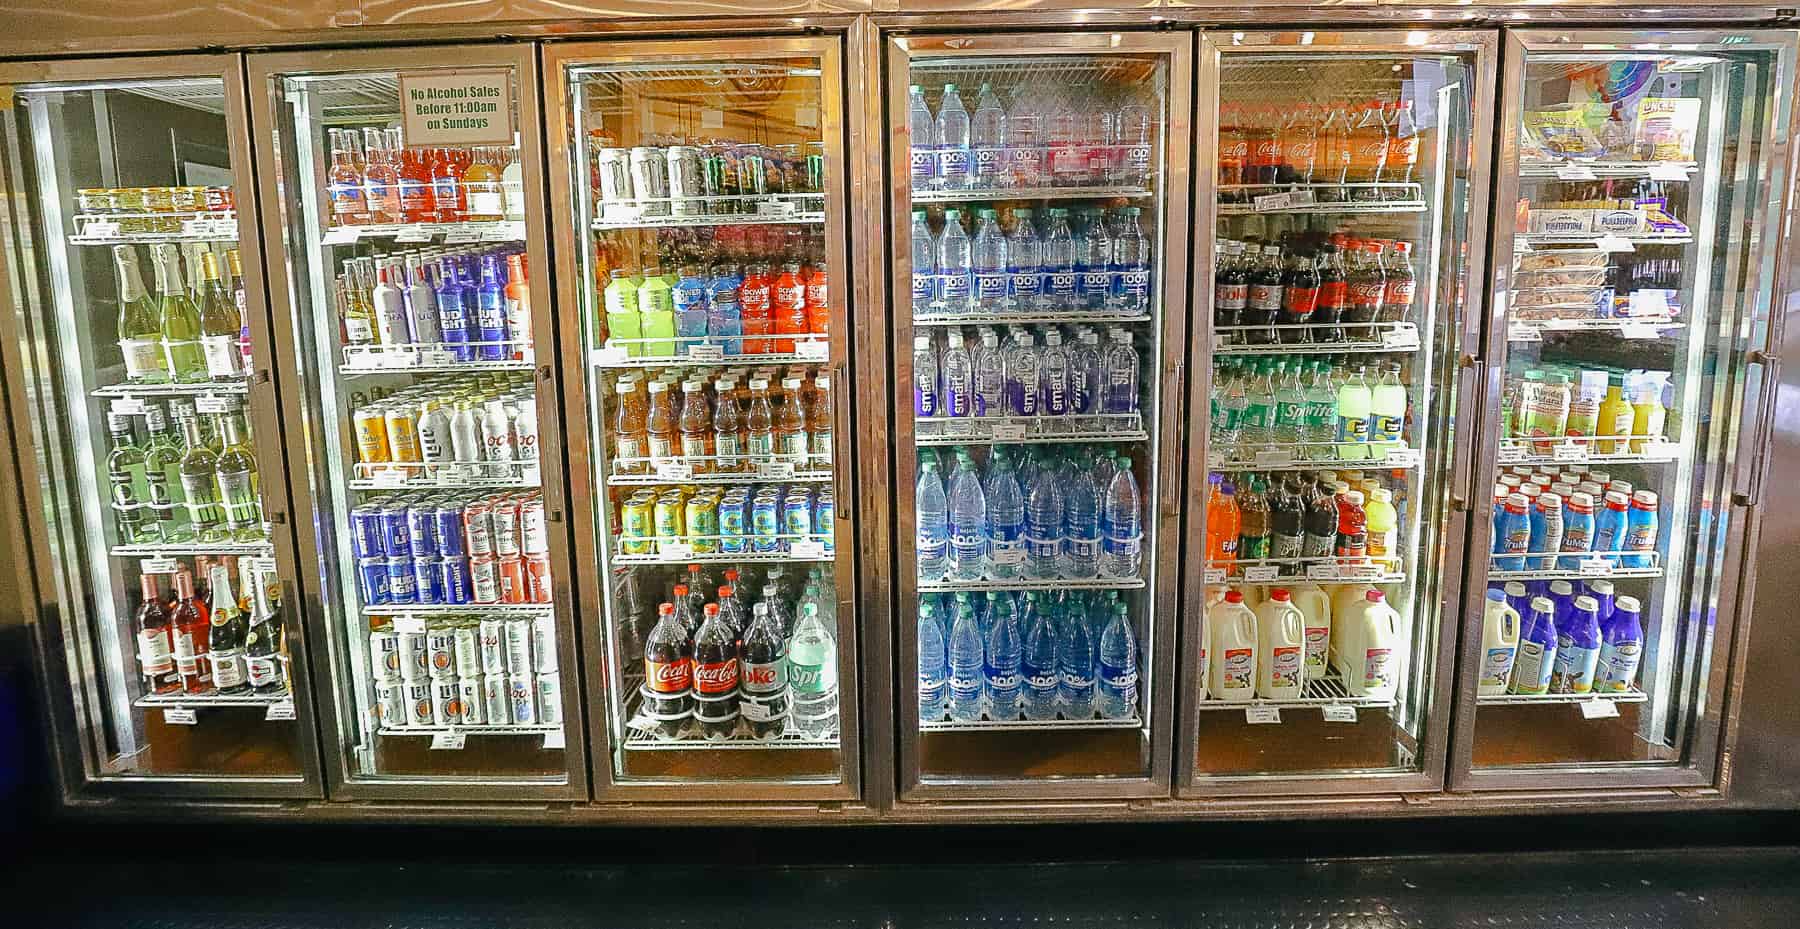 a refrigerated case with items like juice, sports drink, milk, and other beverages 